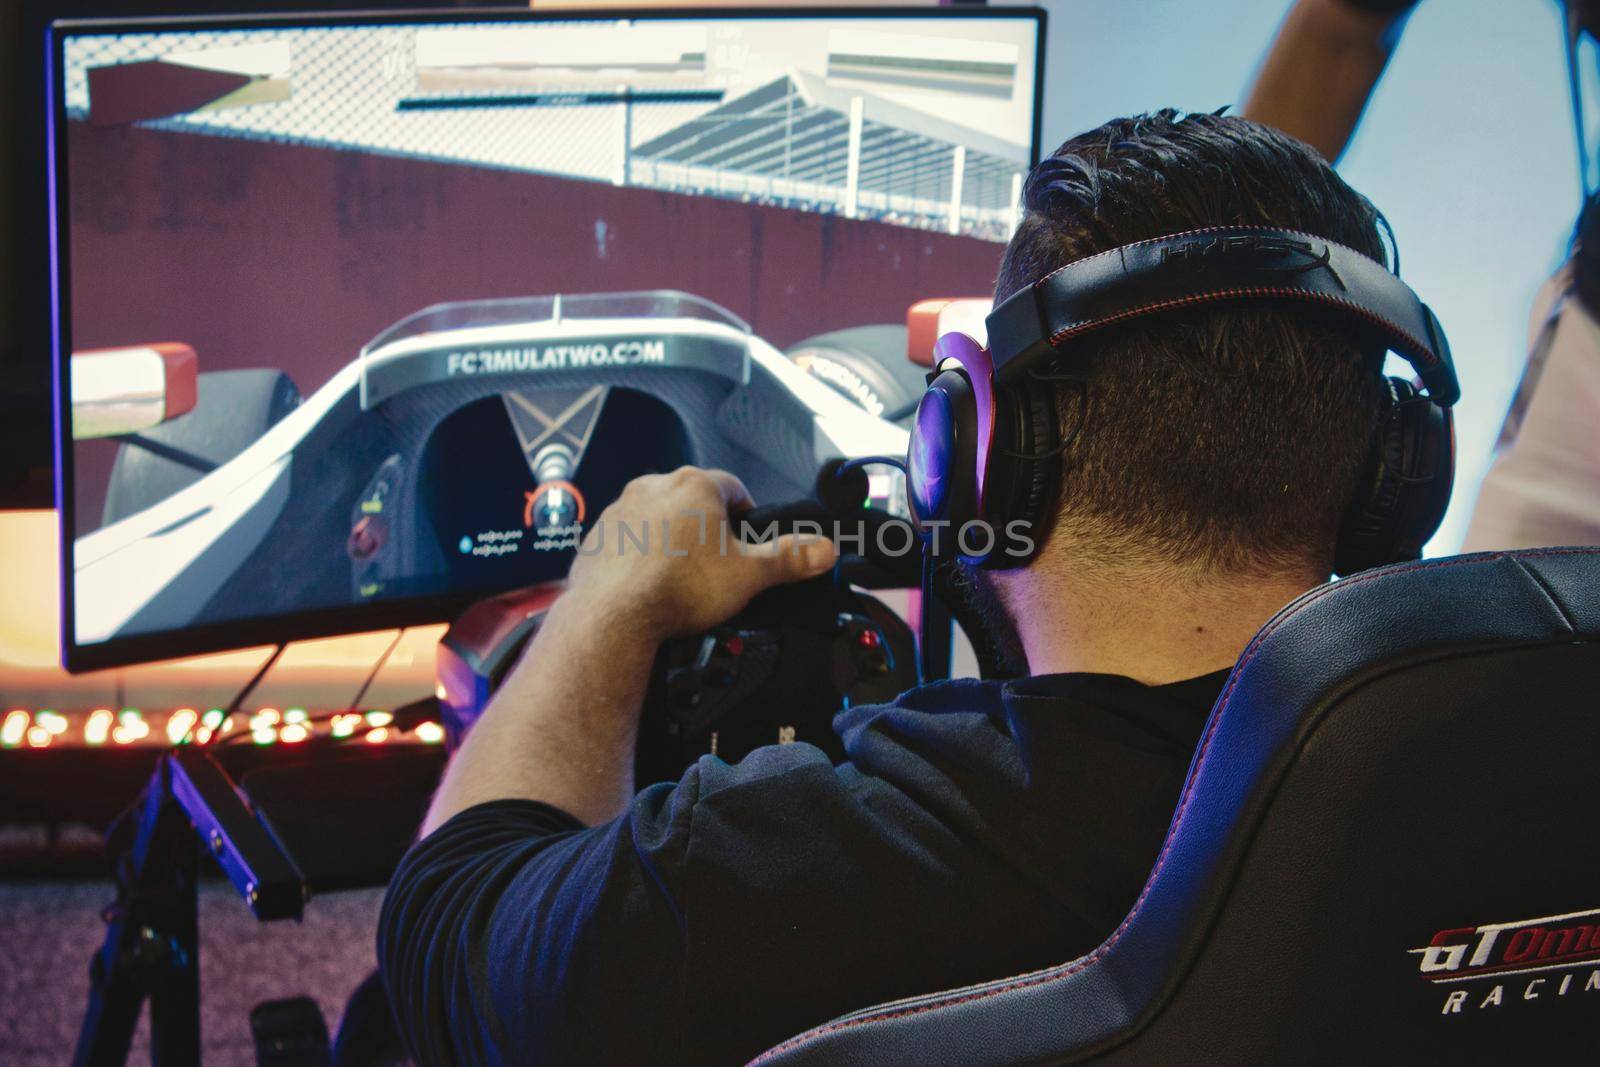 Mosta / Malta - May 11, 2019: A man playing a virtual reality racing game with steering wheel and headphones at a gadget fair by tennesseewitney